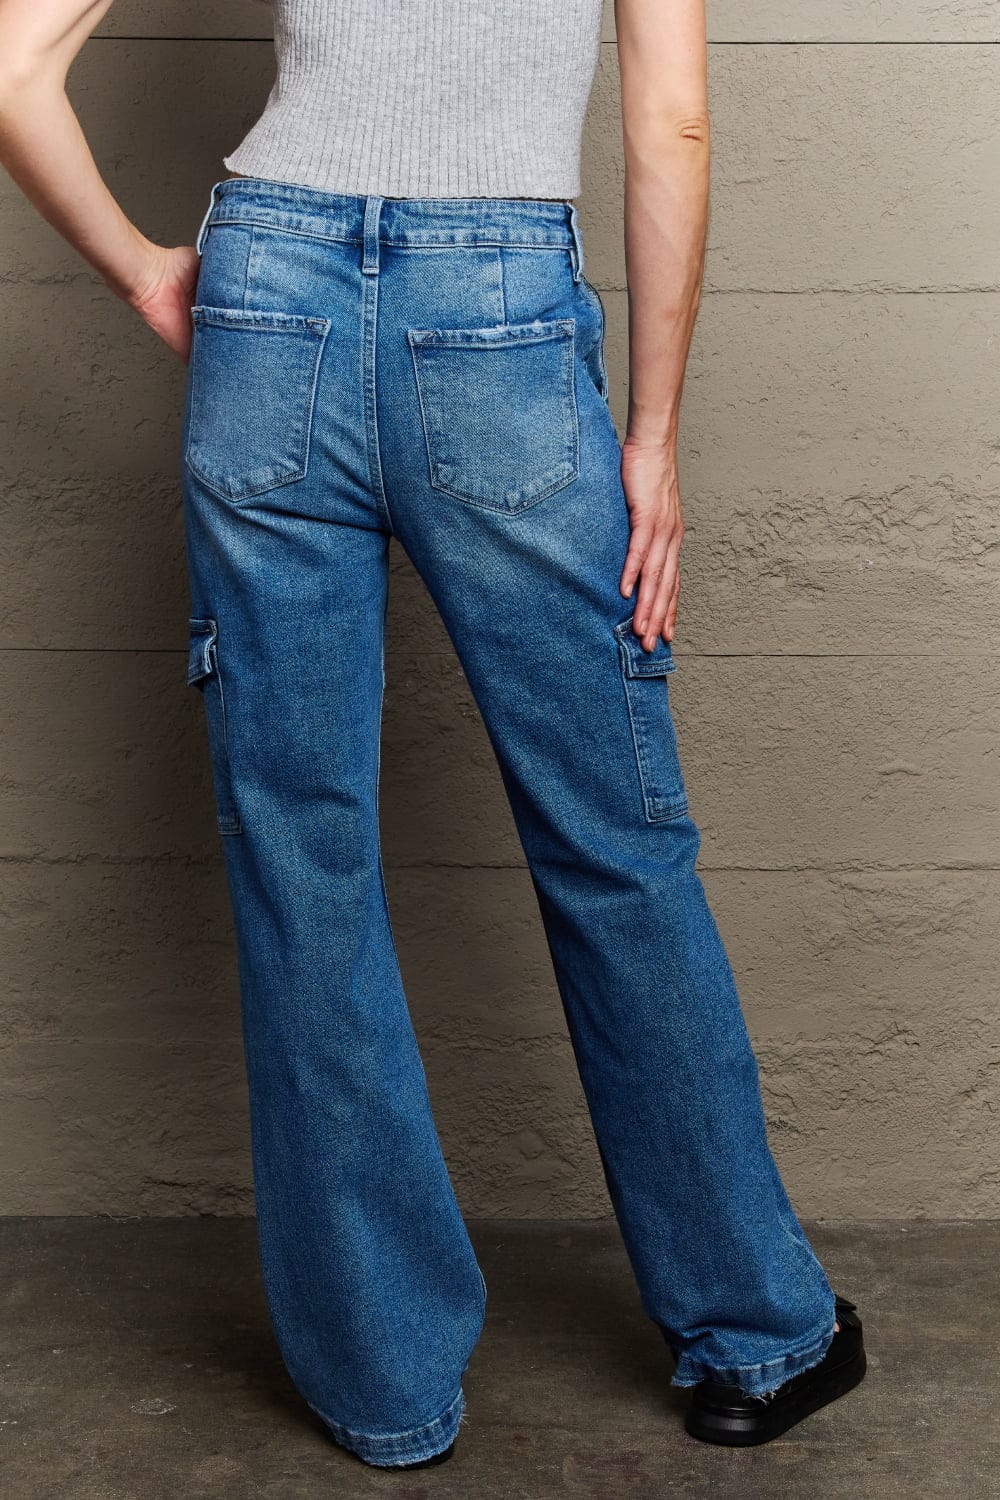 Unique Kulture Kancan Holly High Waisted Cargo Flare Jeans. A stylish pair of high-waisted cargo flare jeans from the Kancan Holly collection. Elevate your fashion with this trendy and versatile denim piece.